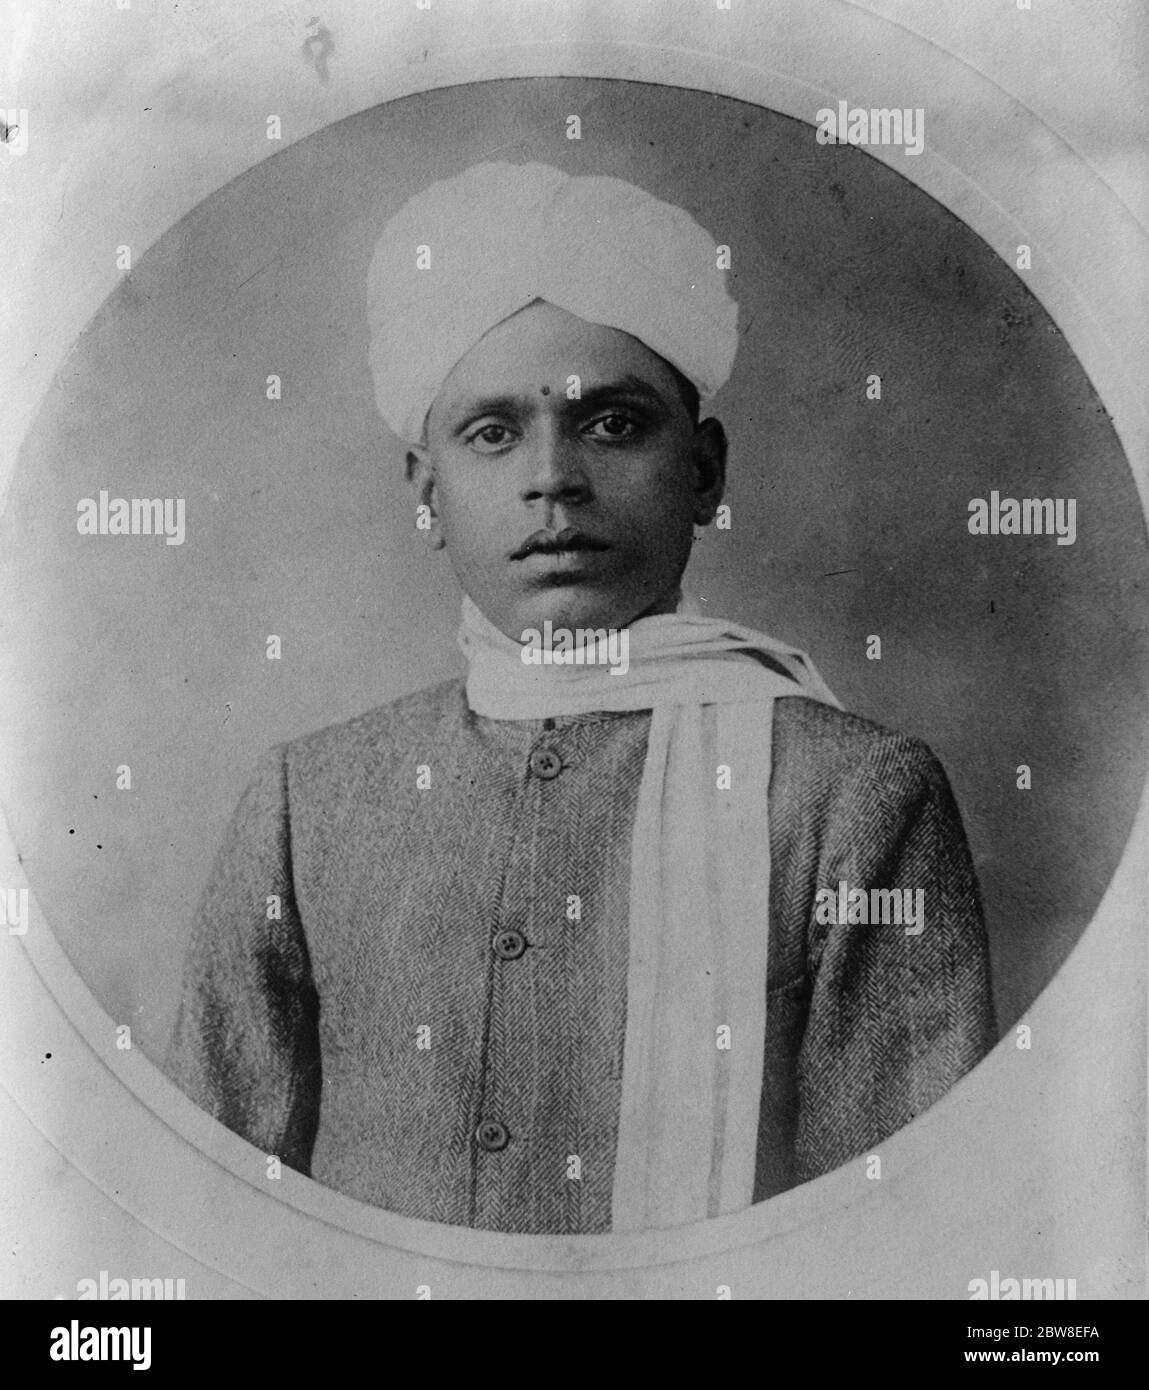 Seconder of the independence resolution at the Indian National Congress . Mr S Satayamurthy , a leading Congressman from Madras , who has probably done more propaganda work for Indian Independence than any other leader of the movement . A new picture just received in London . 1930 Stock Photo